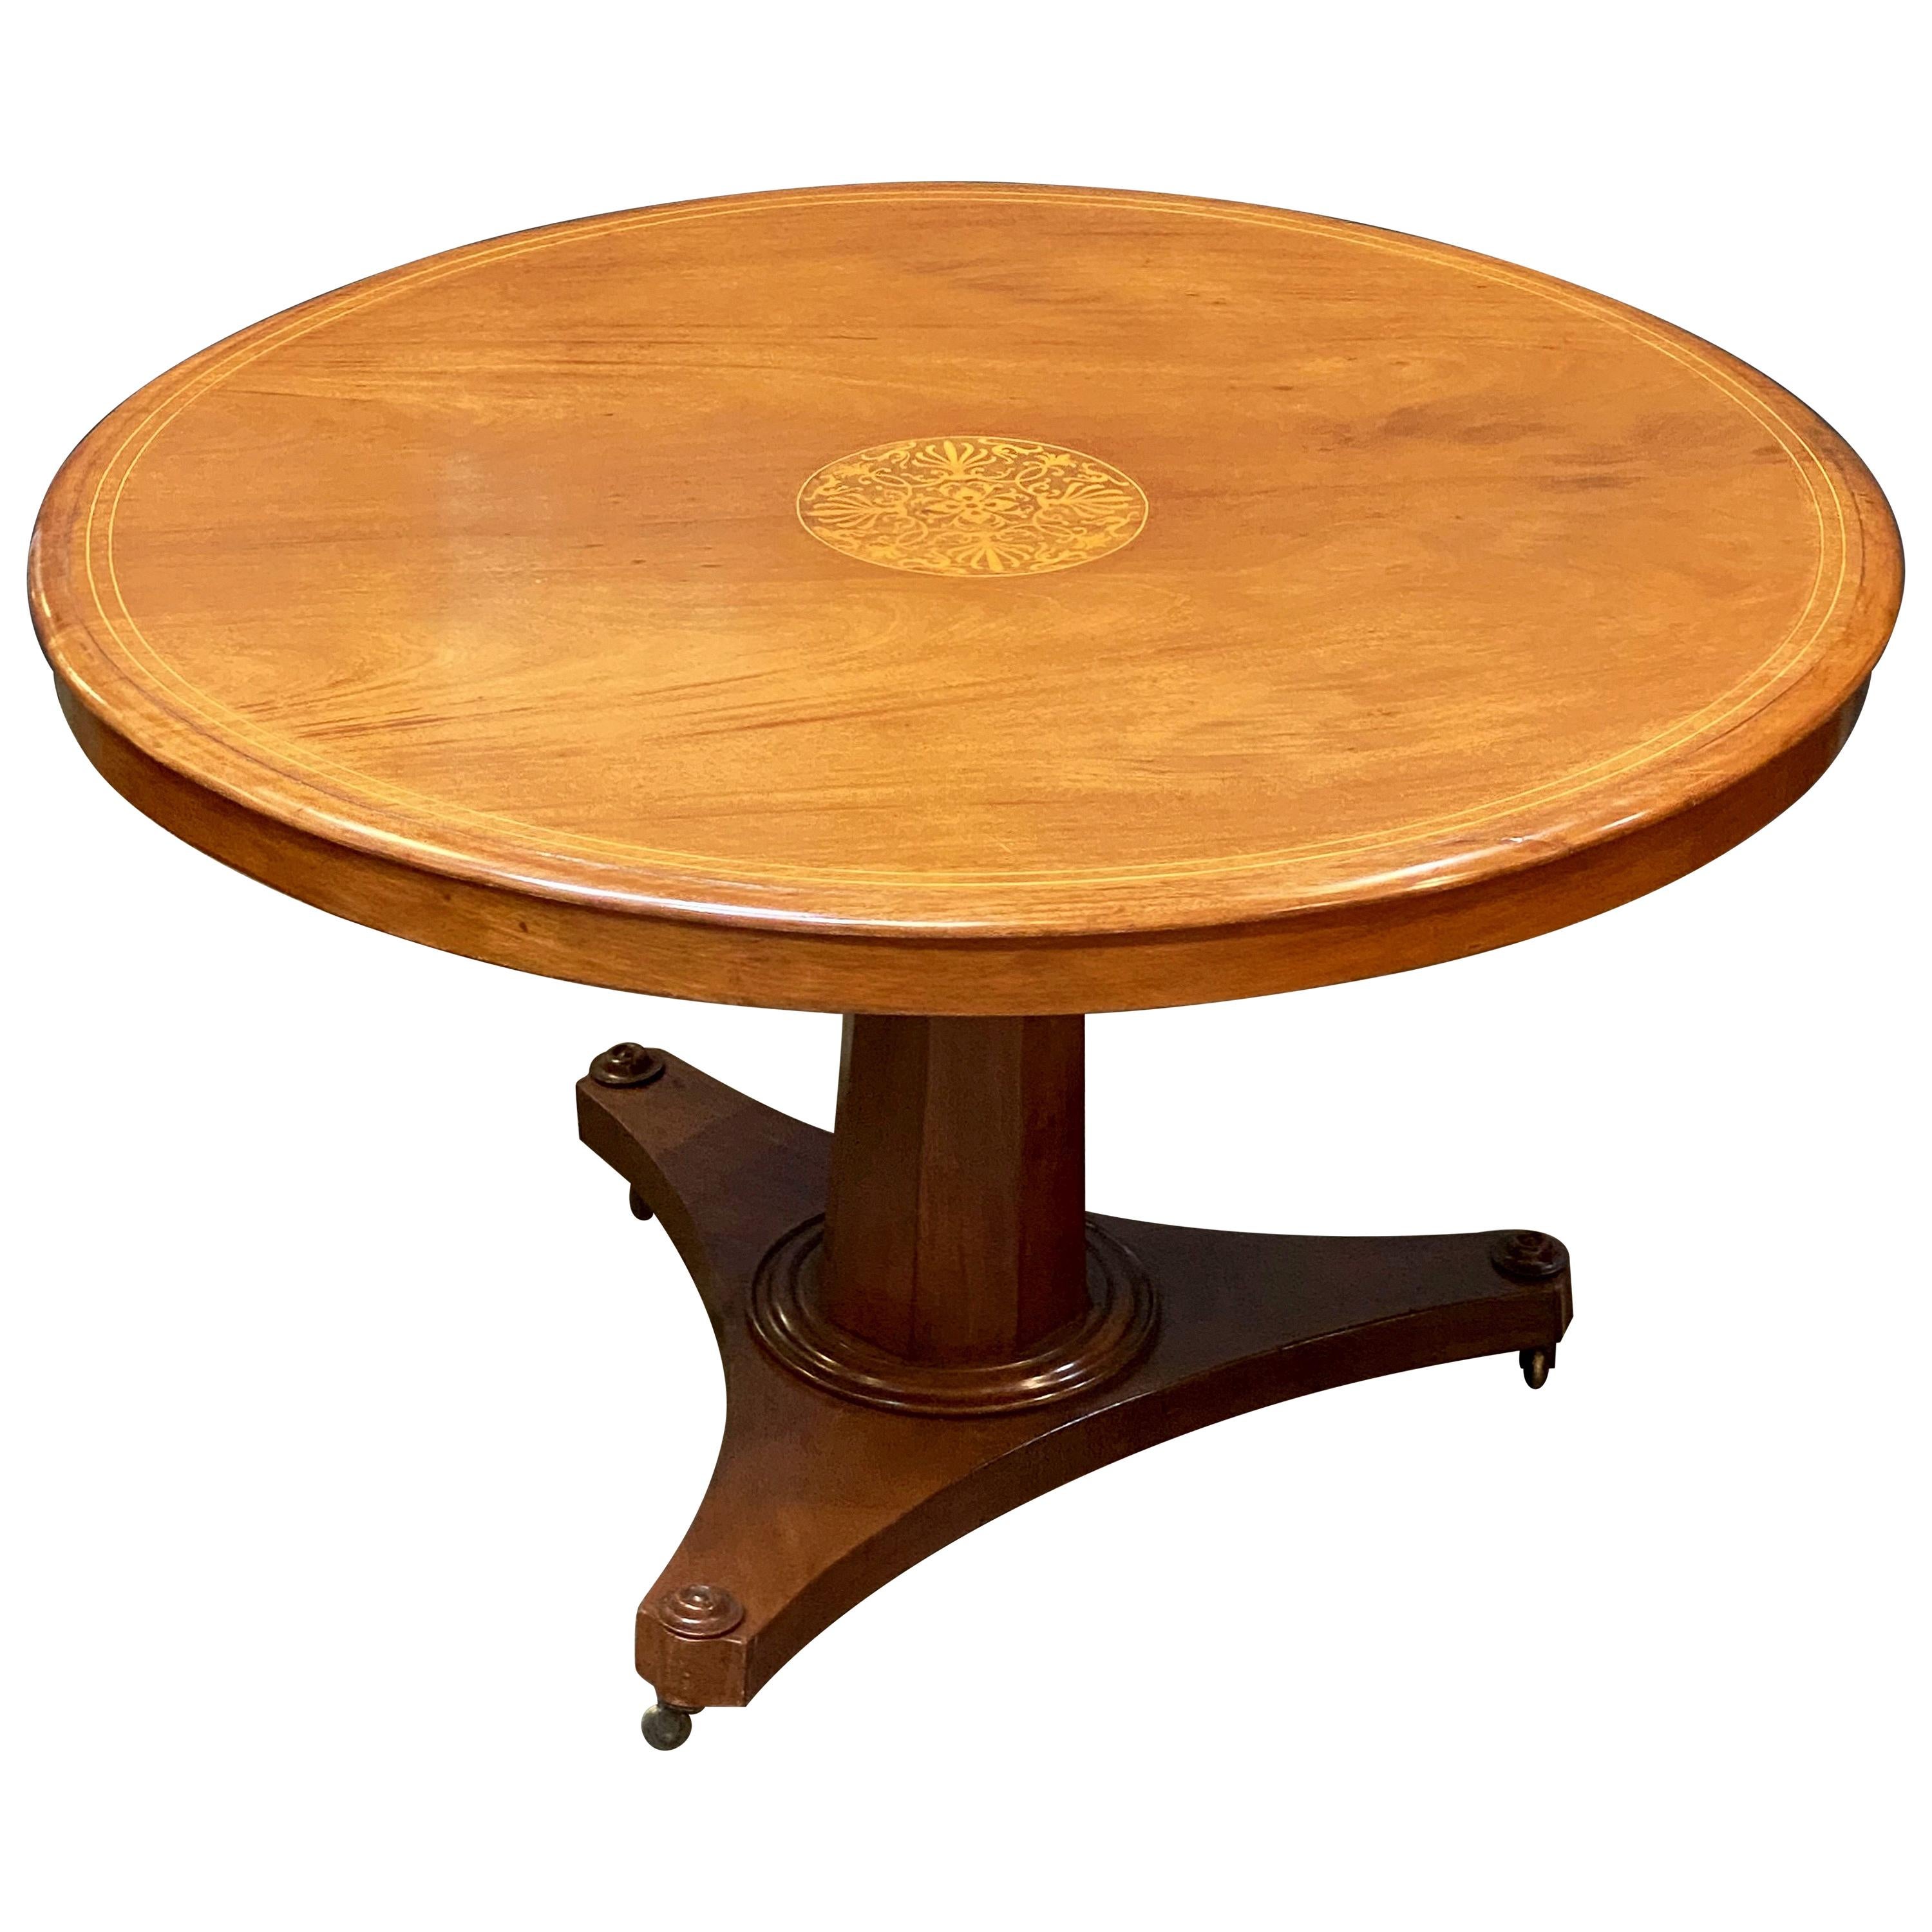 English Round Tilt-Top Center or Breakfast Table of Mahogany